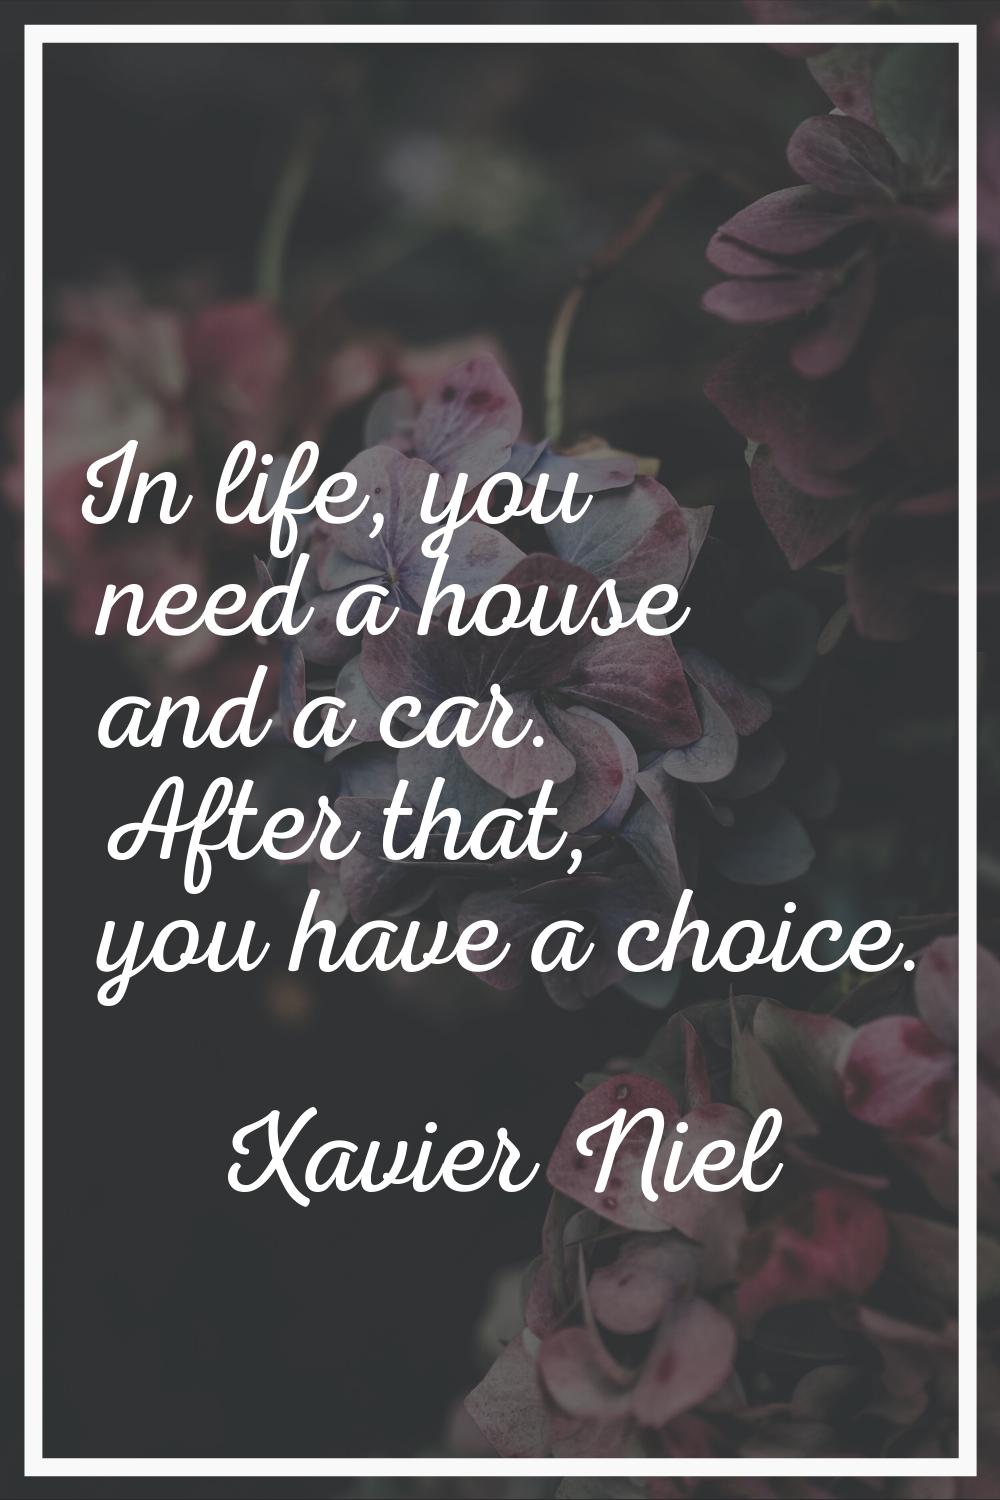 In life, you need a house and a car. After that, you have a choice.